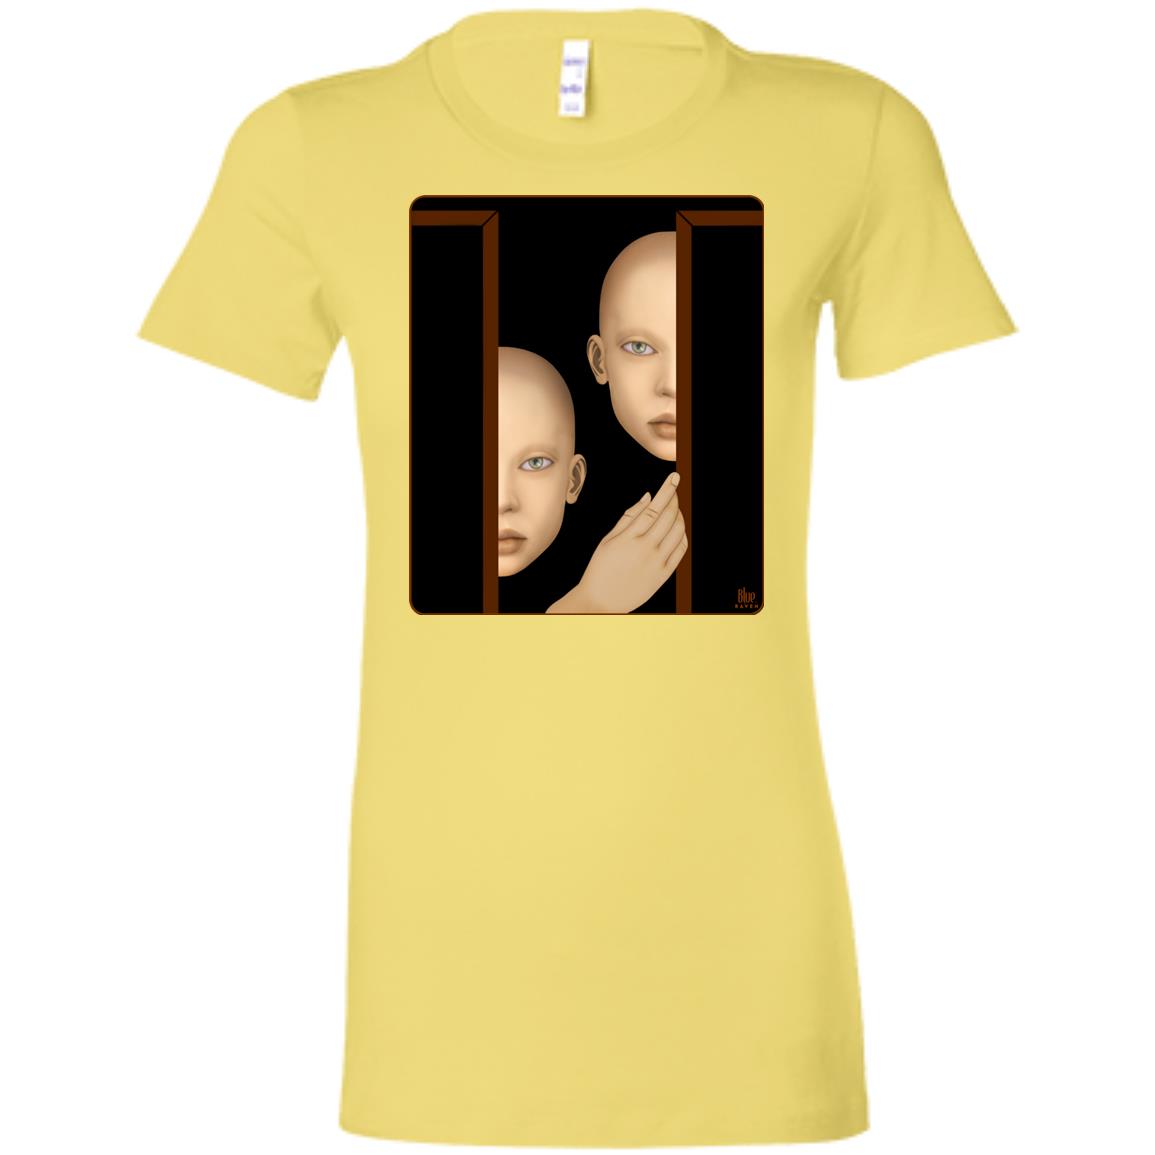 THE WATCHERS - Women's Fitted T-Shirt